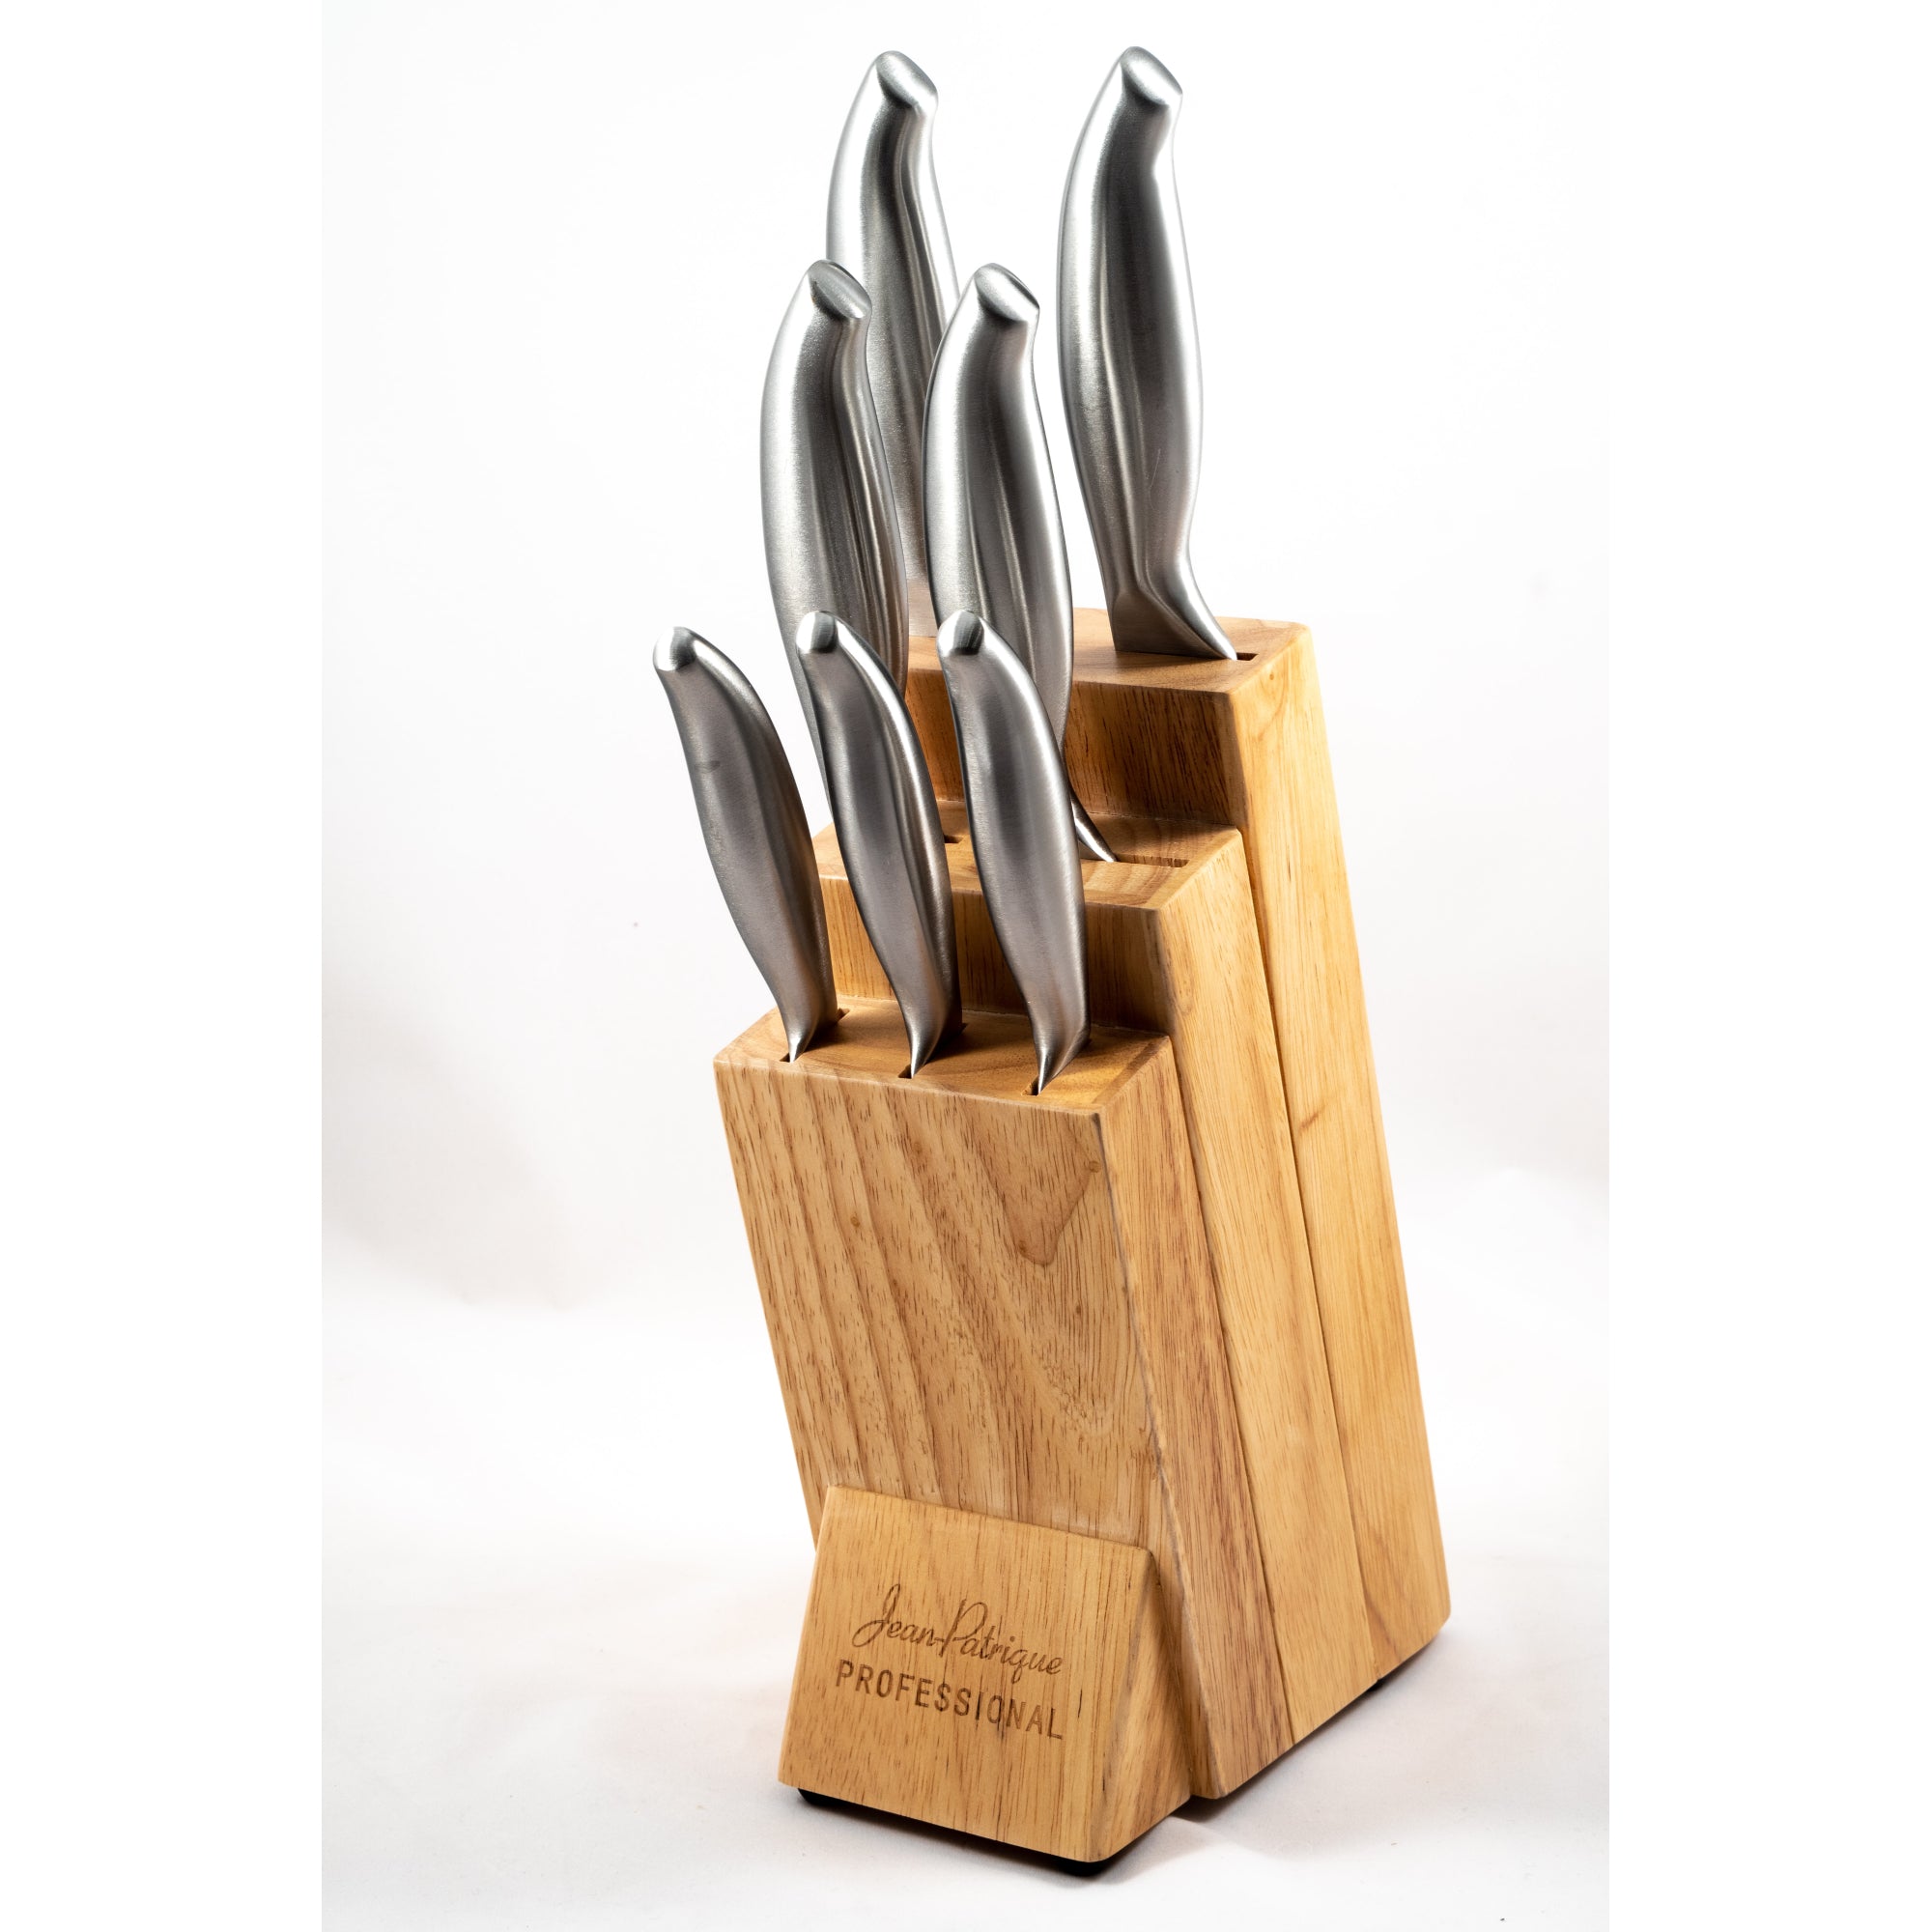 WALLOP Kitchen Knife Set - 7 Piece Knife Set with Wooden Block